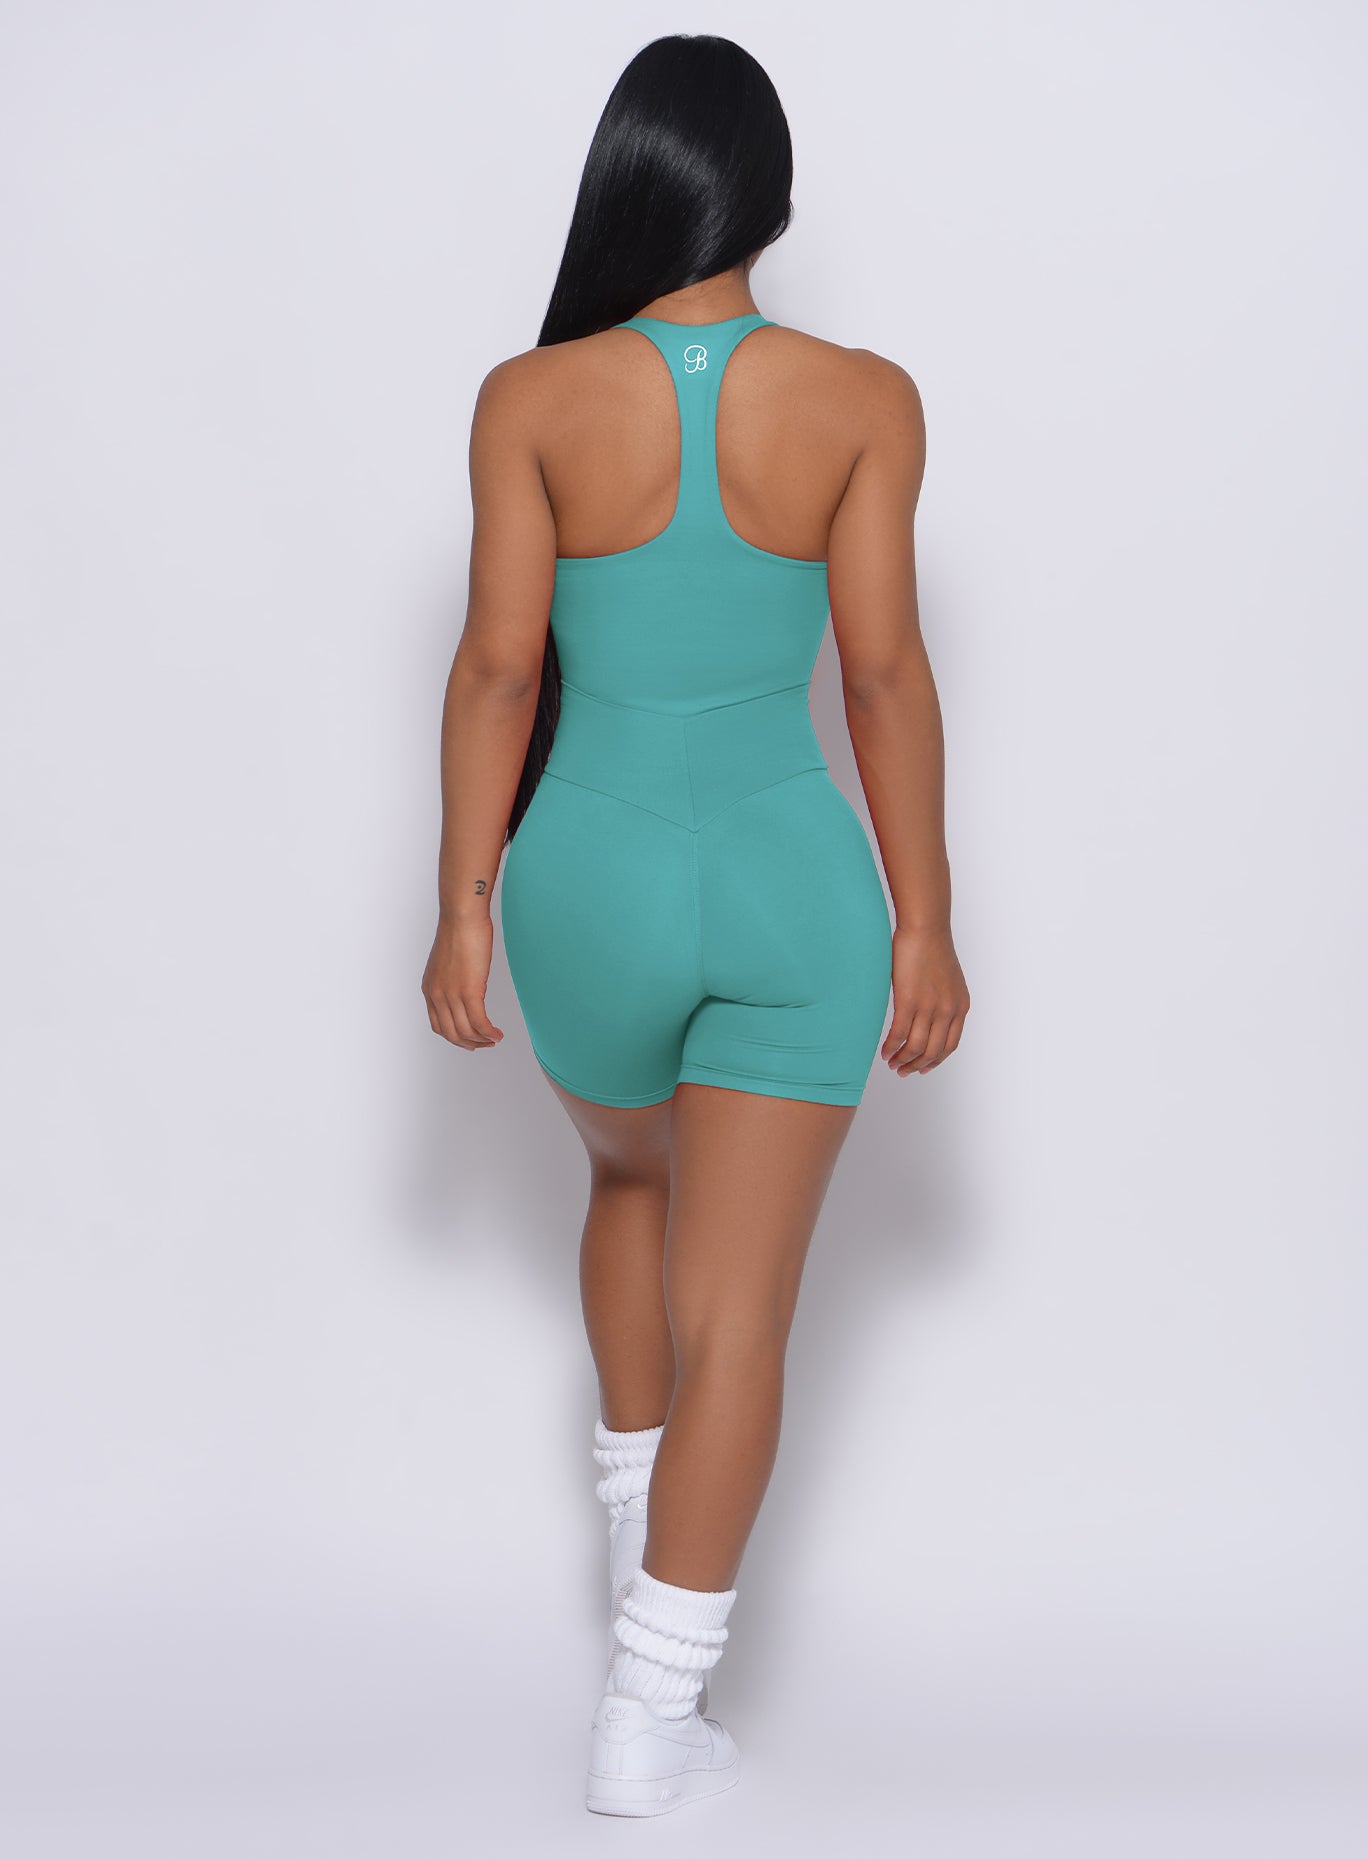 back profile profile view of the model wearing our refined shorts in green tea color and a matching bodysuit